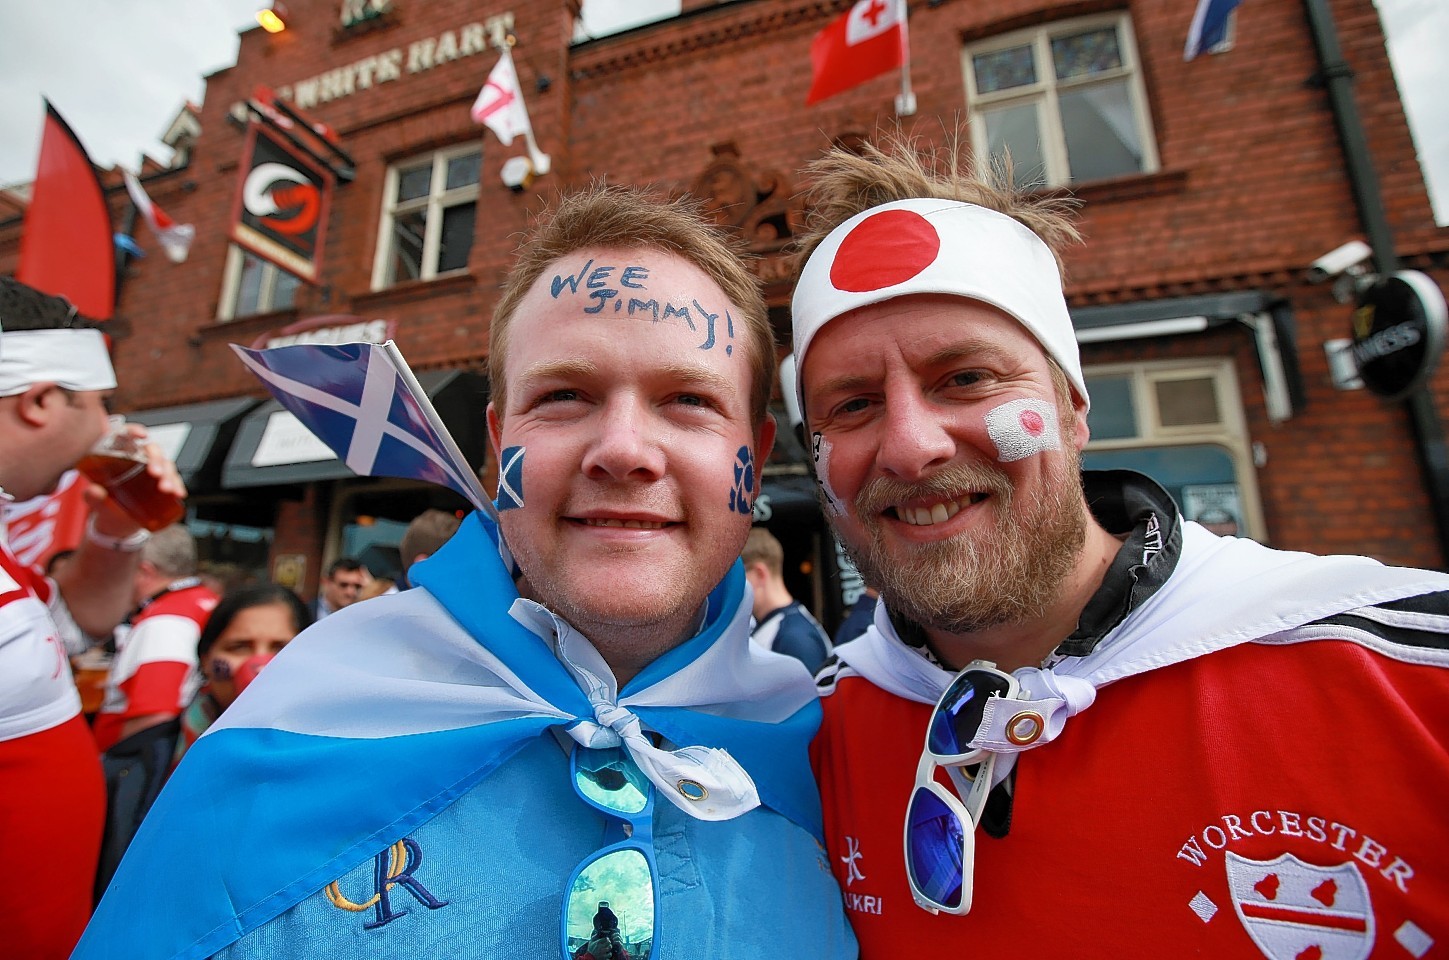 Scotland and Japan fans before the Rugby World Cup match at the Kingsholm Stadium